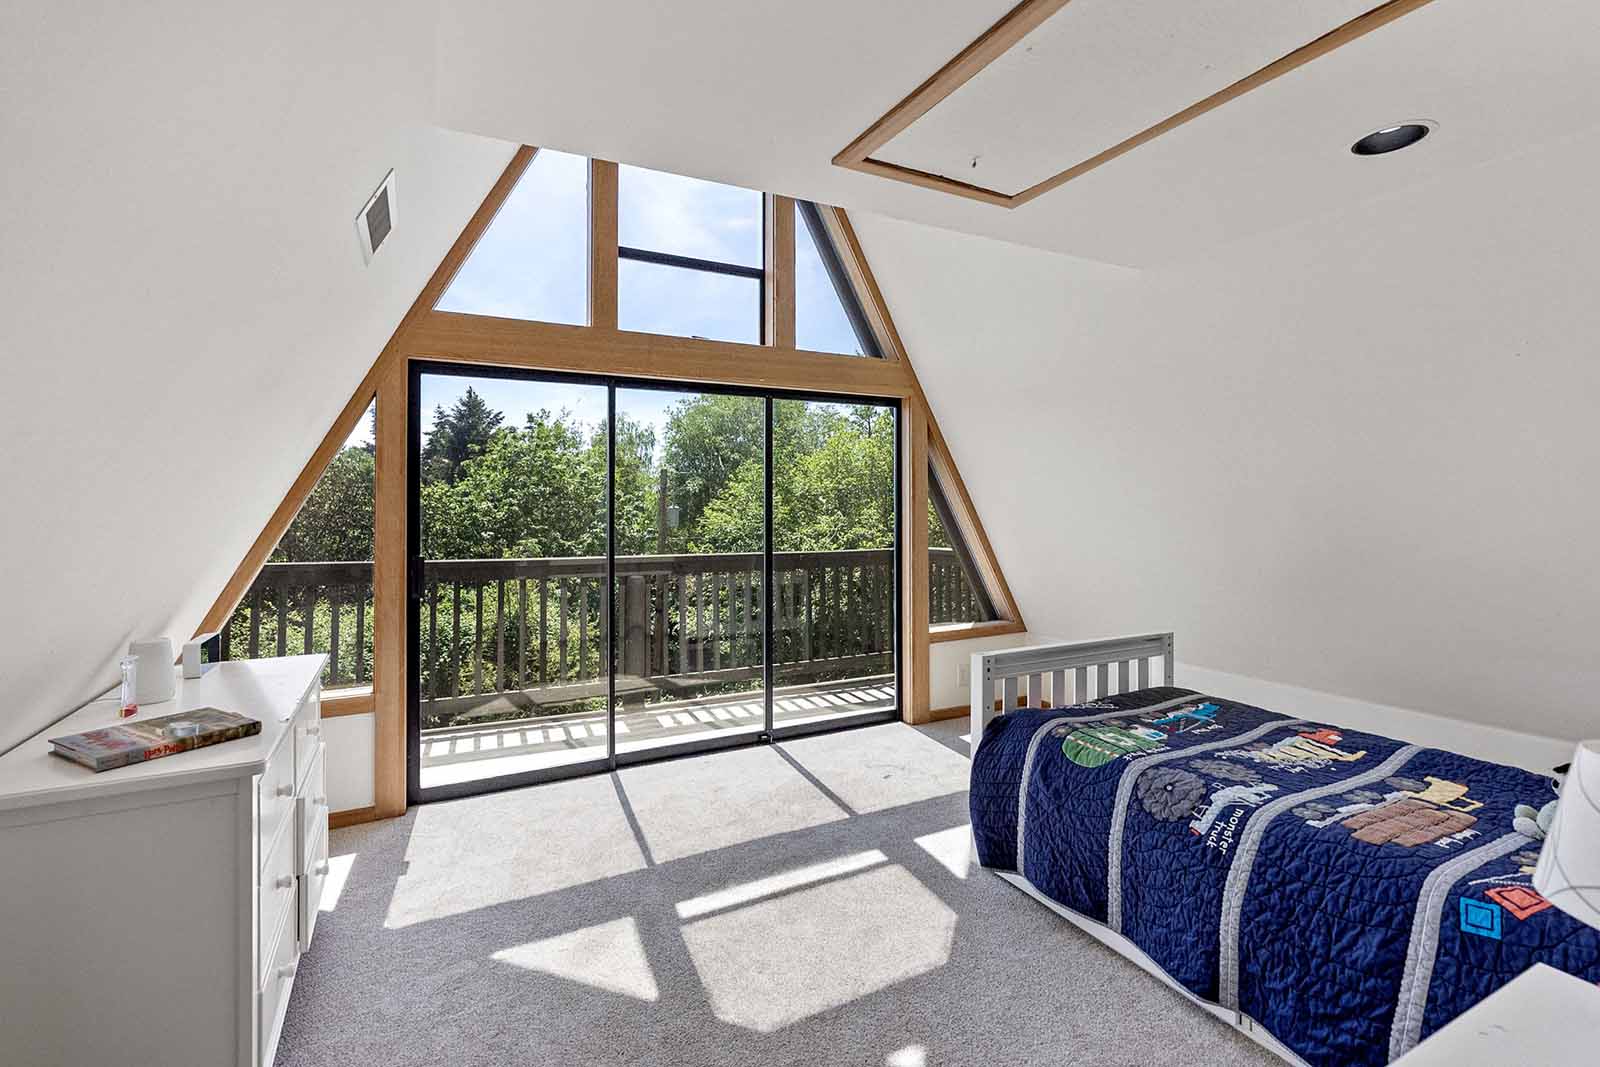 Second bedroom features vaulted ceiling, loft and private balcony